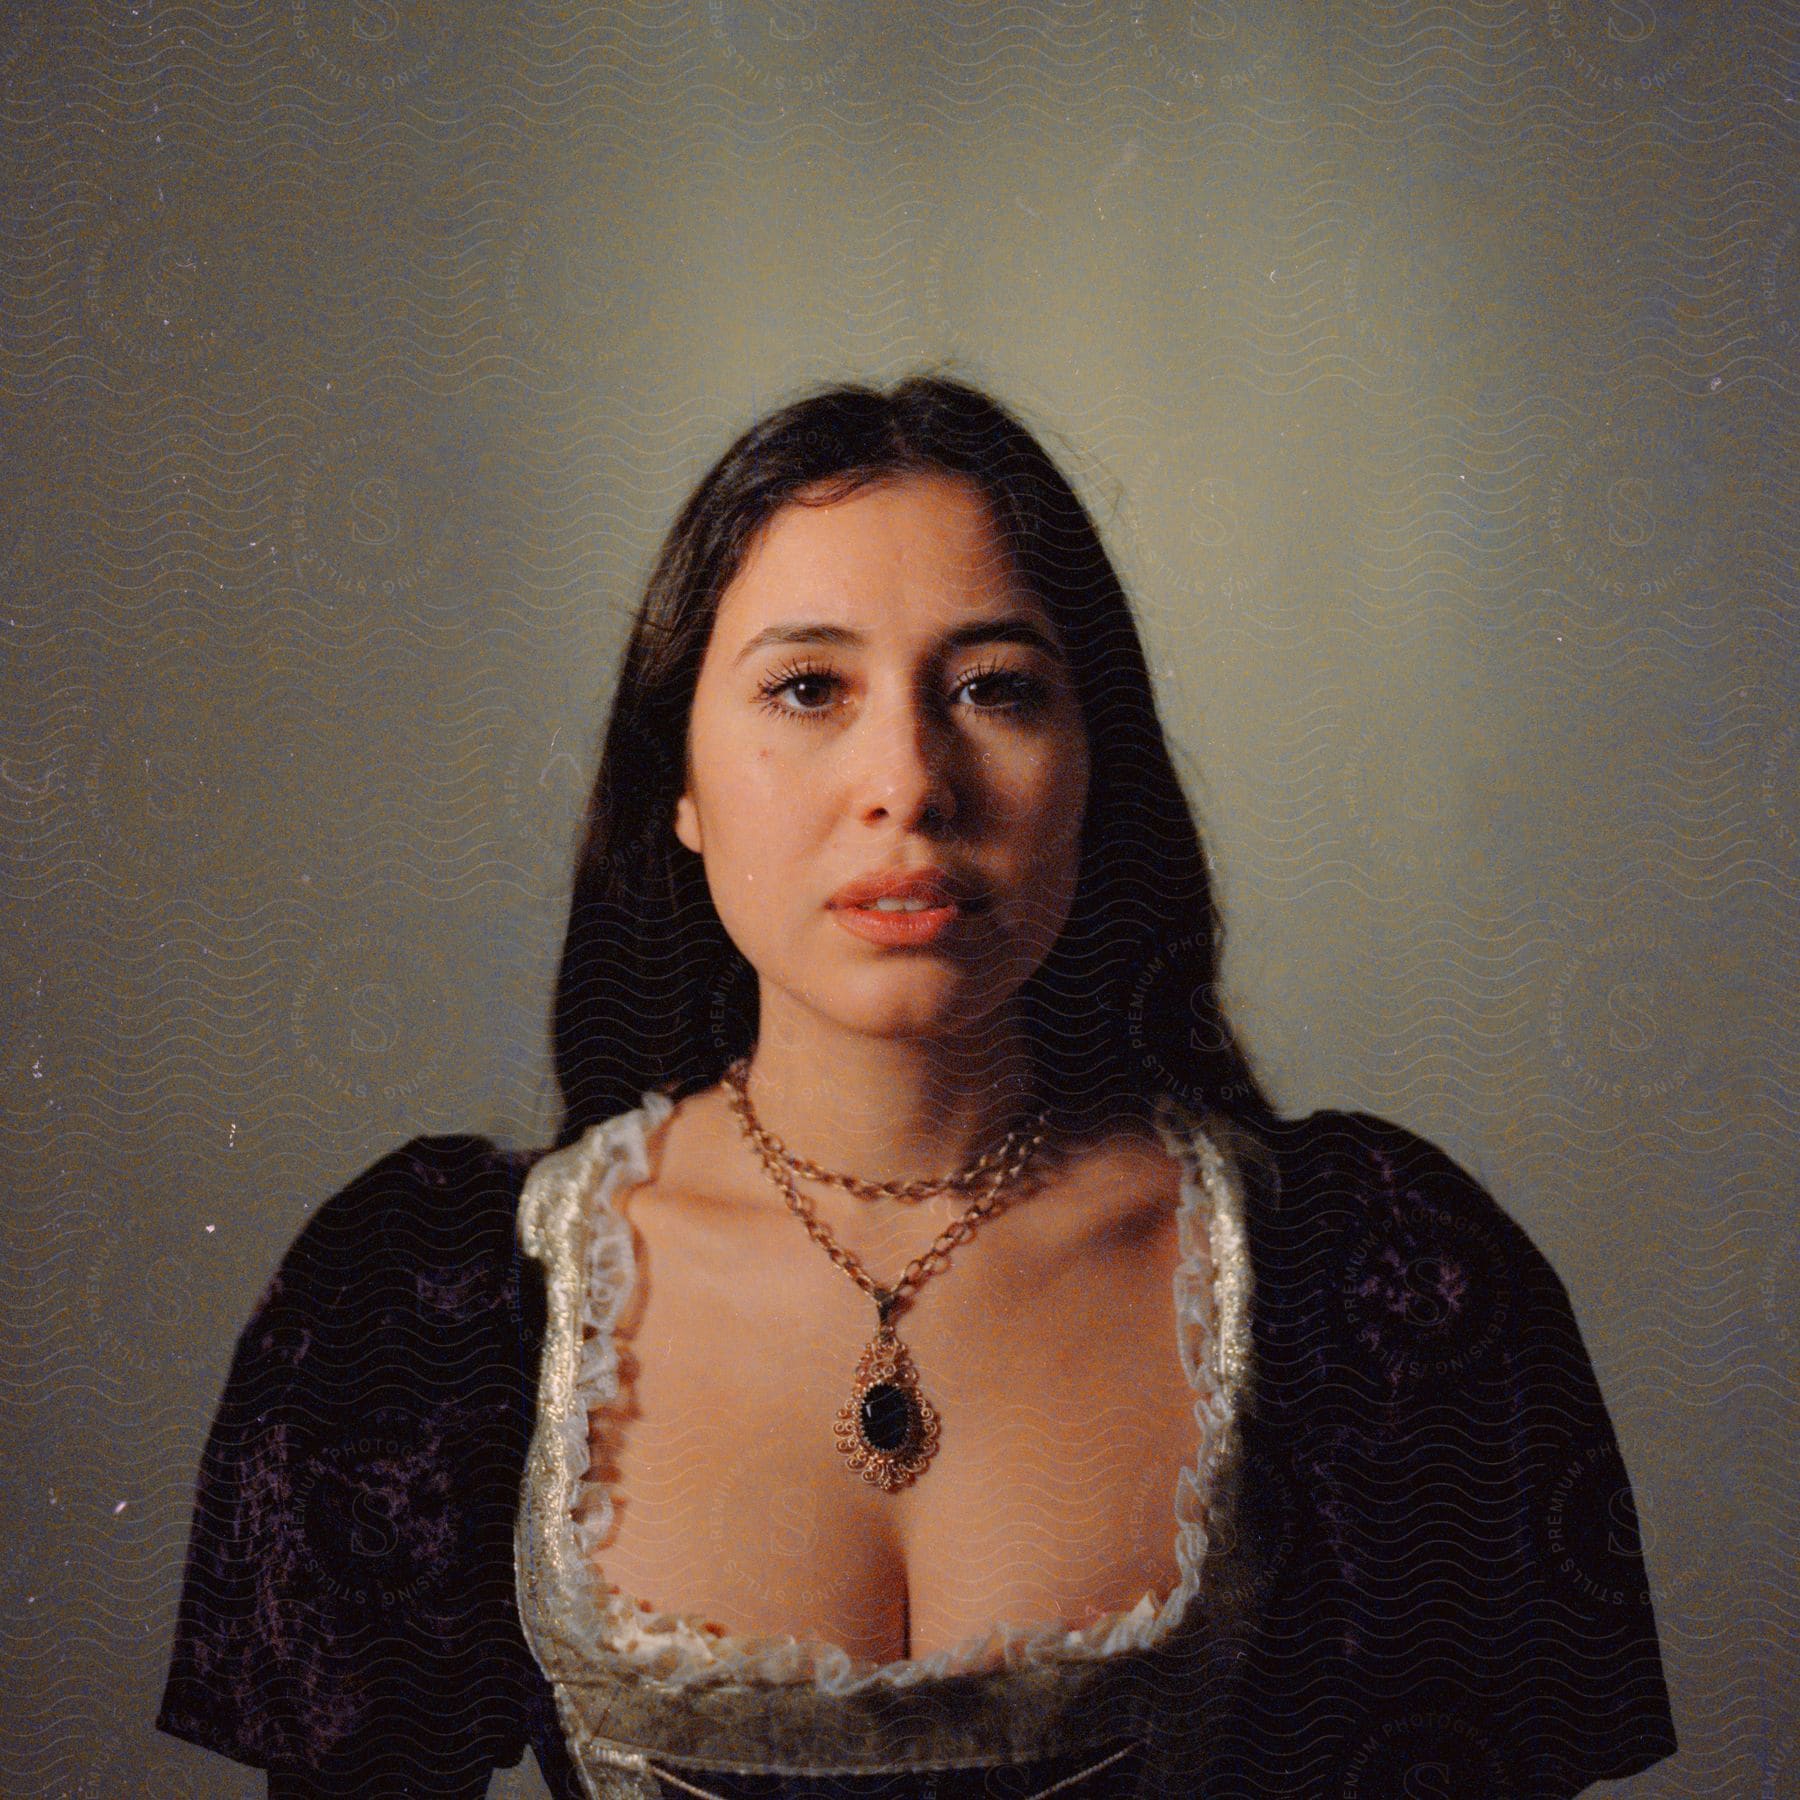 A portrait of a woman in a photography studio with a grey background.